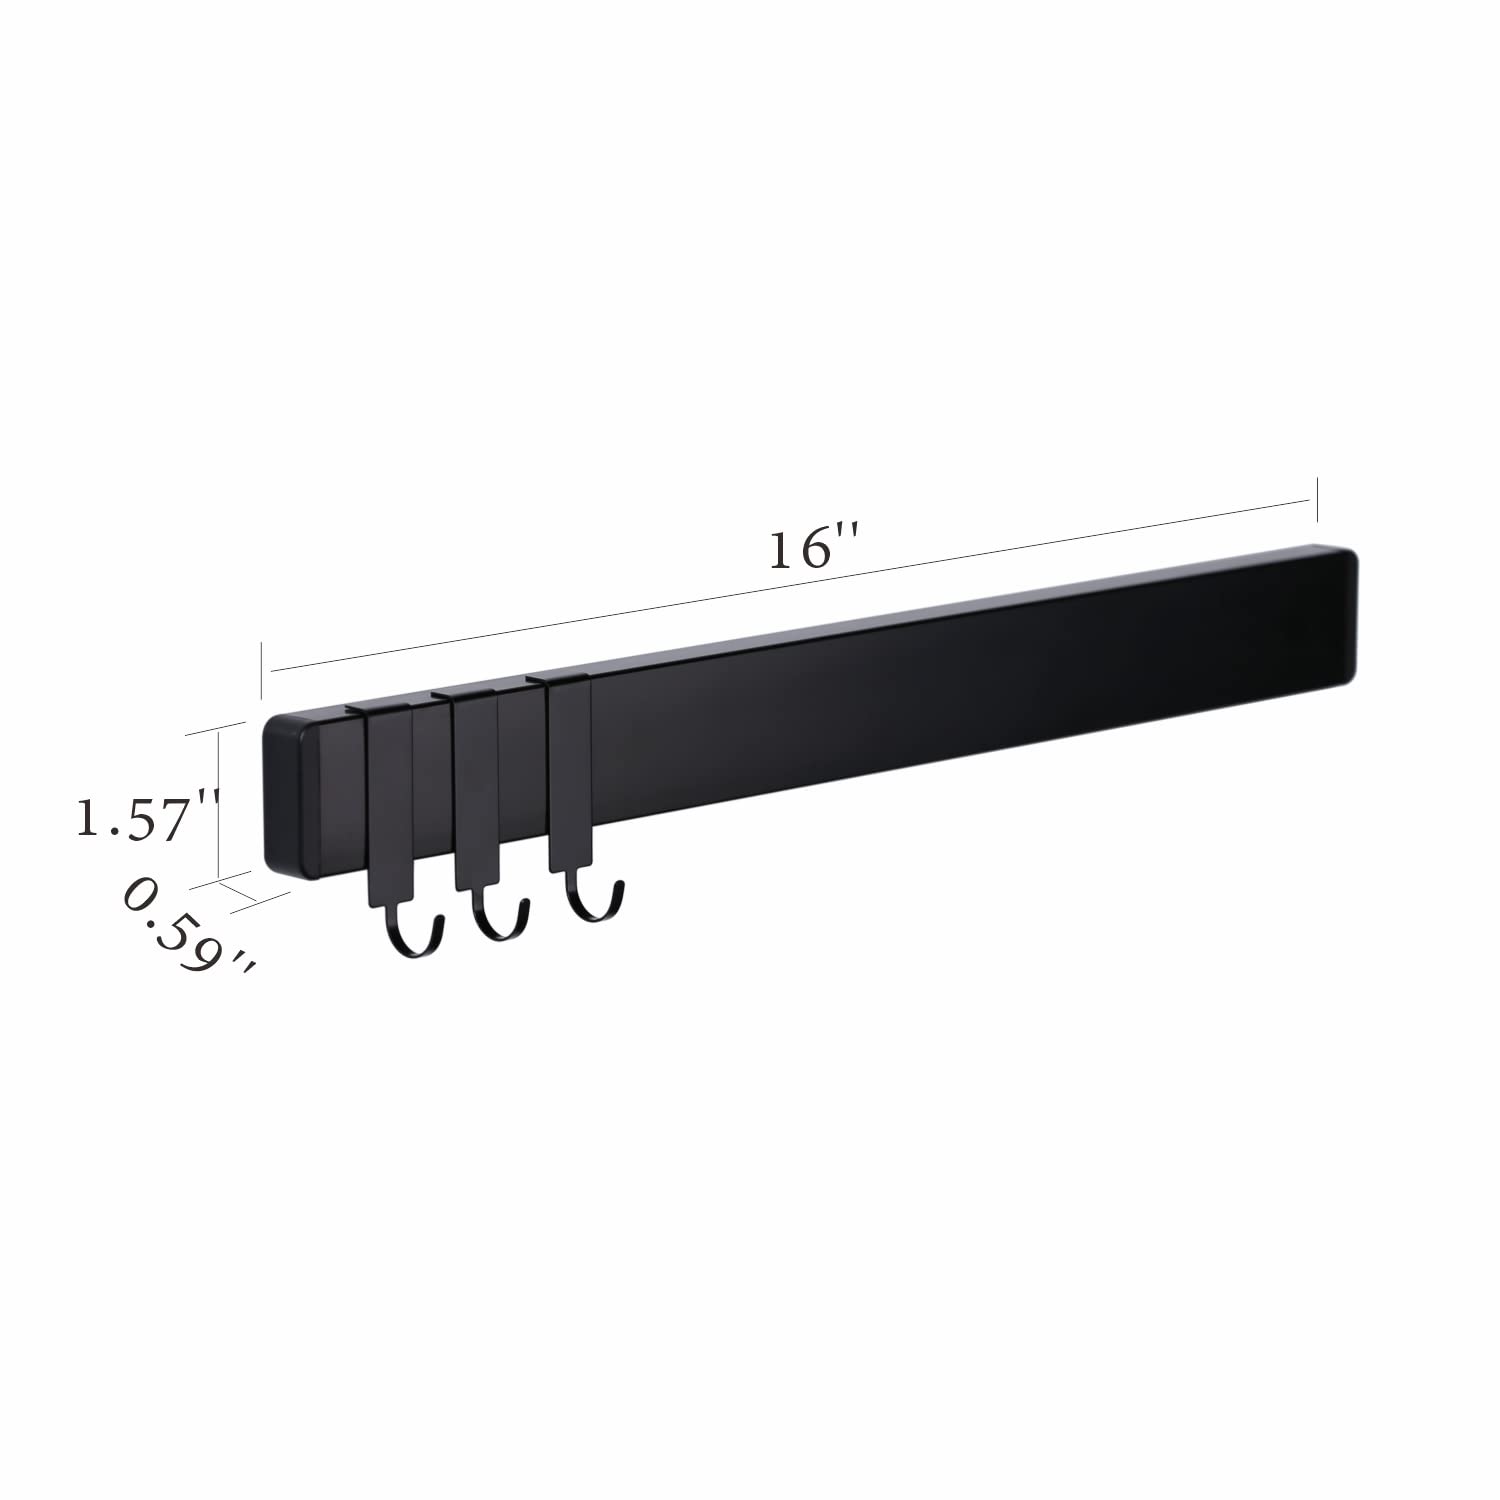 KITCHENDAO Stainless Steel Magnetic Knife Rack Strip Holder with 3 Hooks 16 Inch, 25% Stronger Magnet, Adhesive Magnetic Knife bar Rack No Drilling